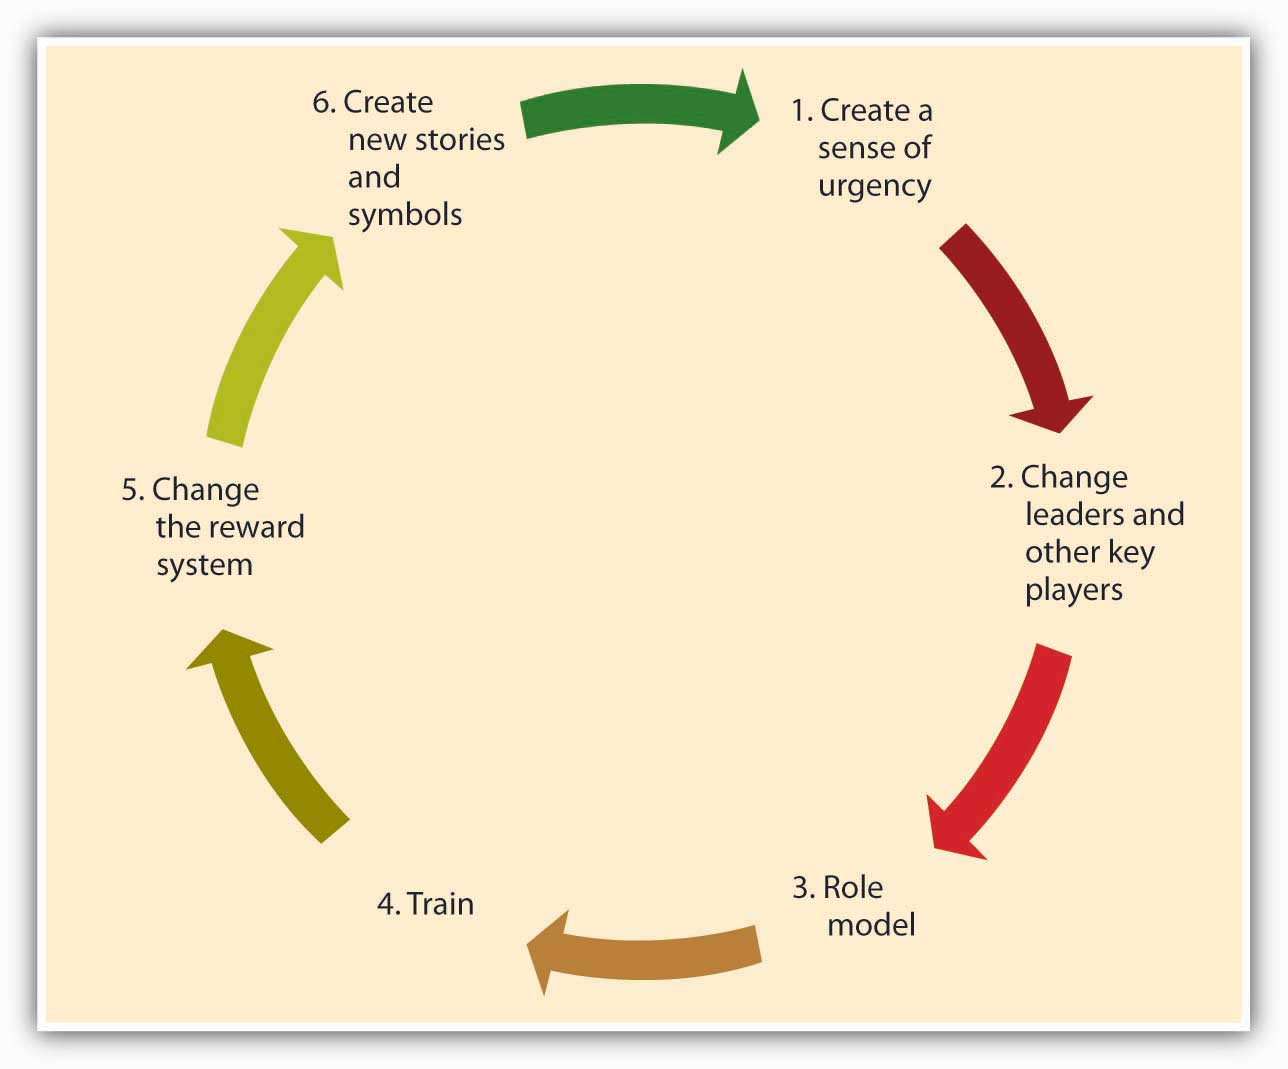 Six Steps to Culture Change: 1) Create a sense of urgency, 2) Change leaders and other key players, 3) Role model, 4) Train, 5) Change the reward system, 6) Create new stories and symbols